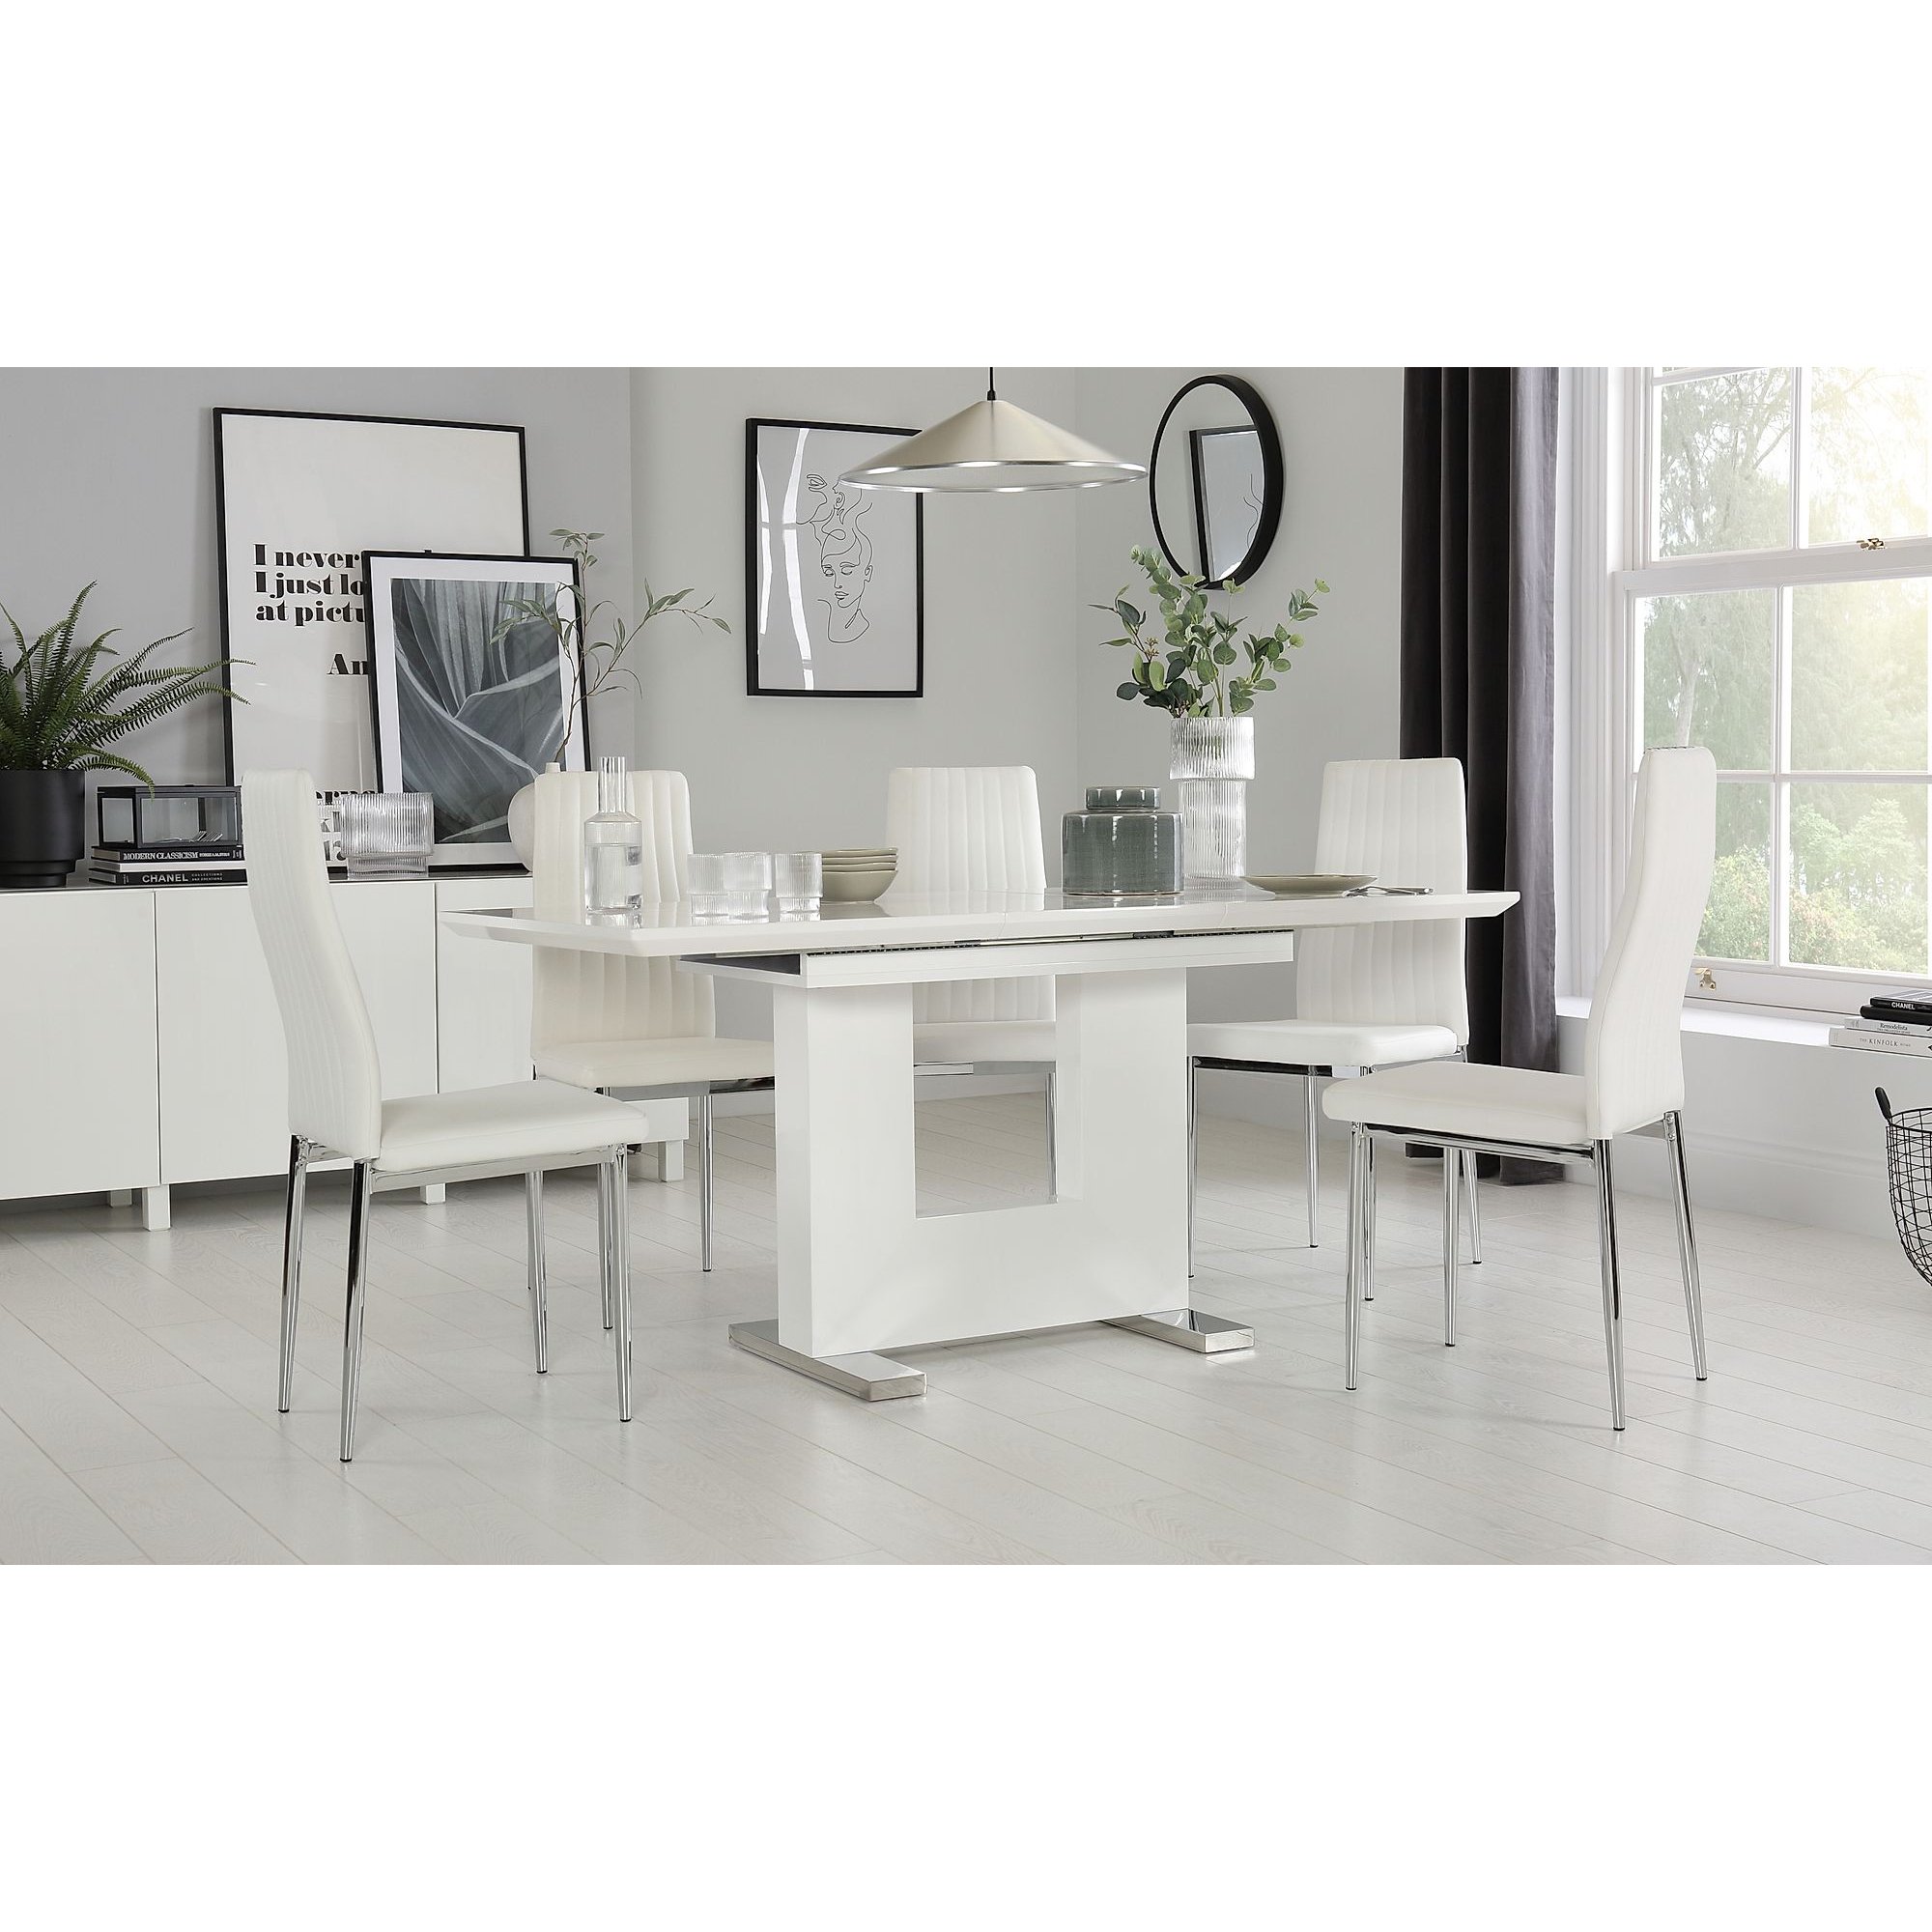 Florence White High Gloss Extending Dining Table with 4 Leon White Leather Chairs